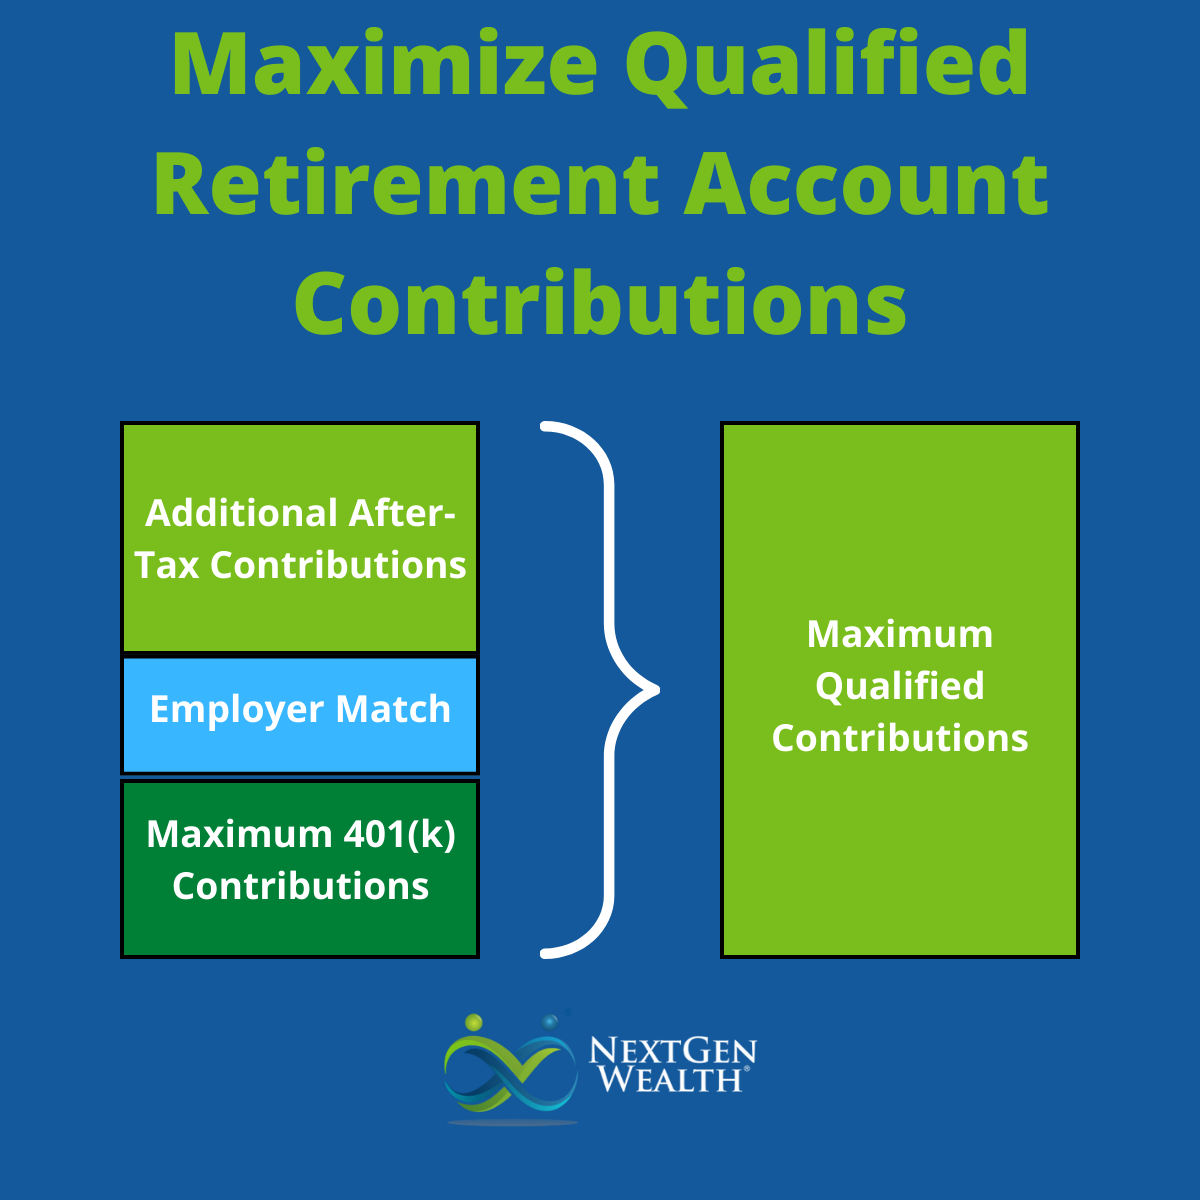 Maximize Qualified Retirement Account Contributions